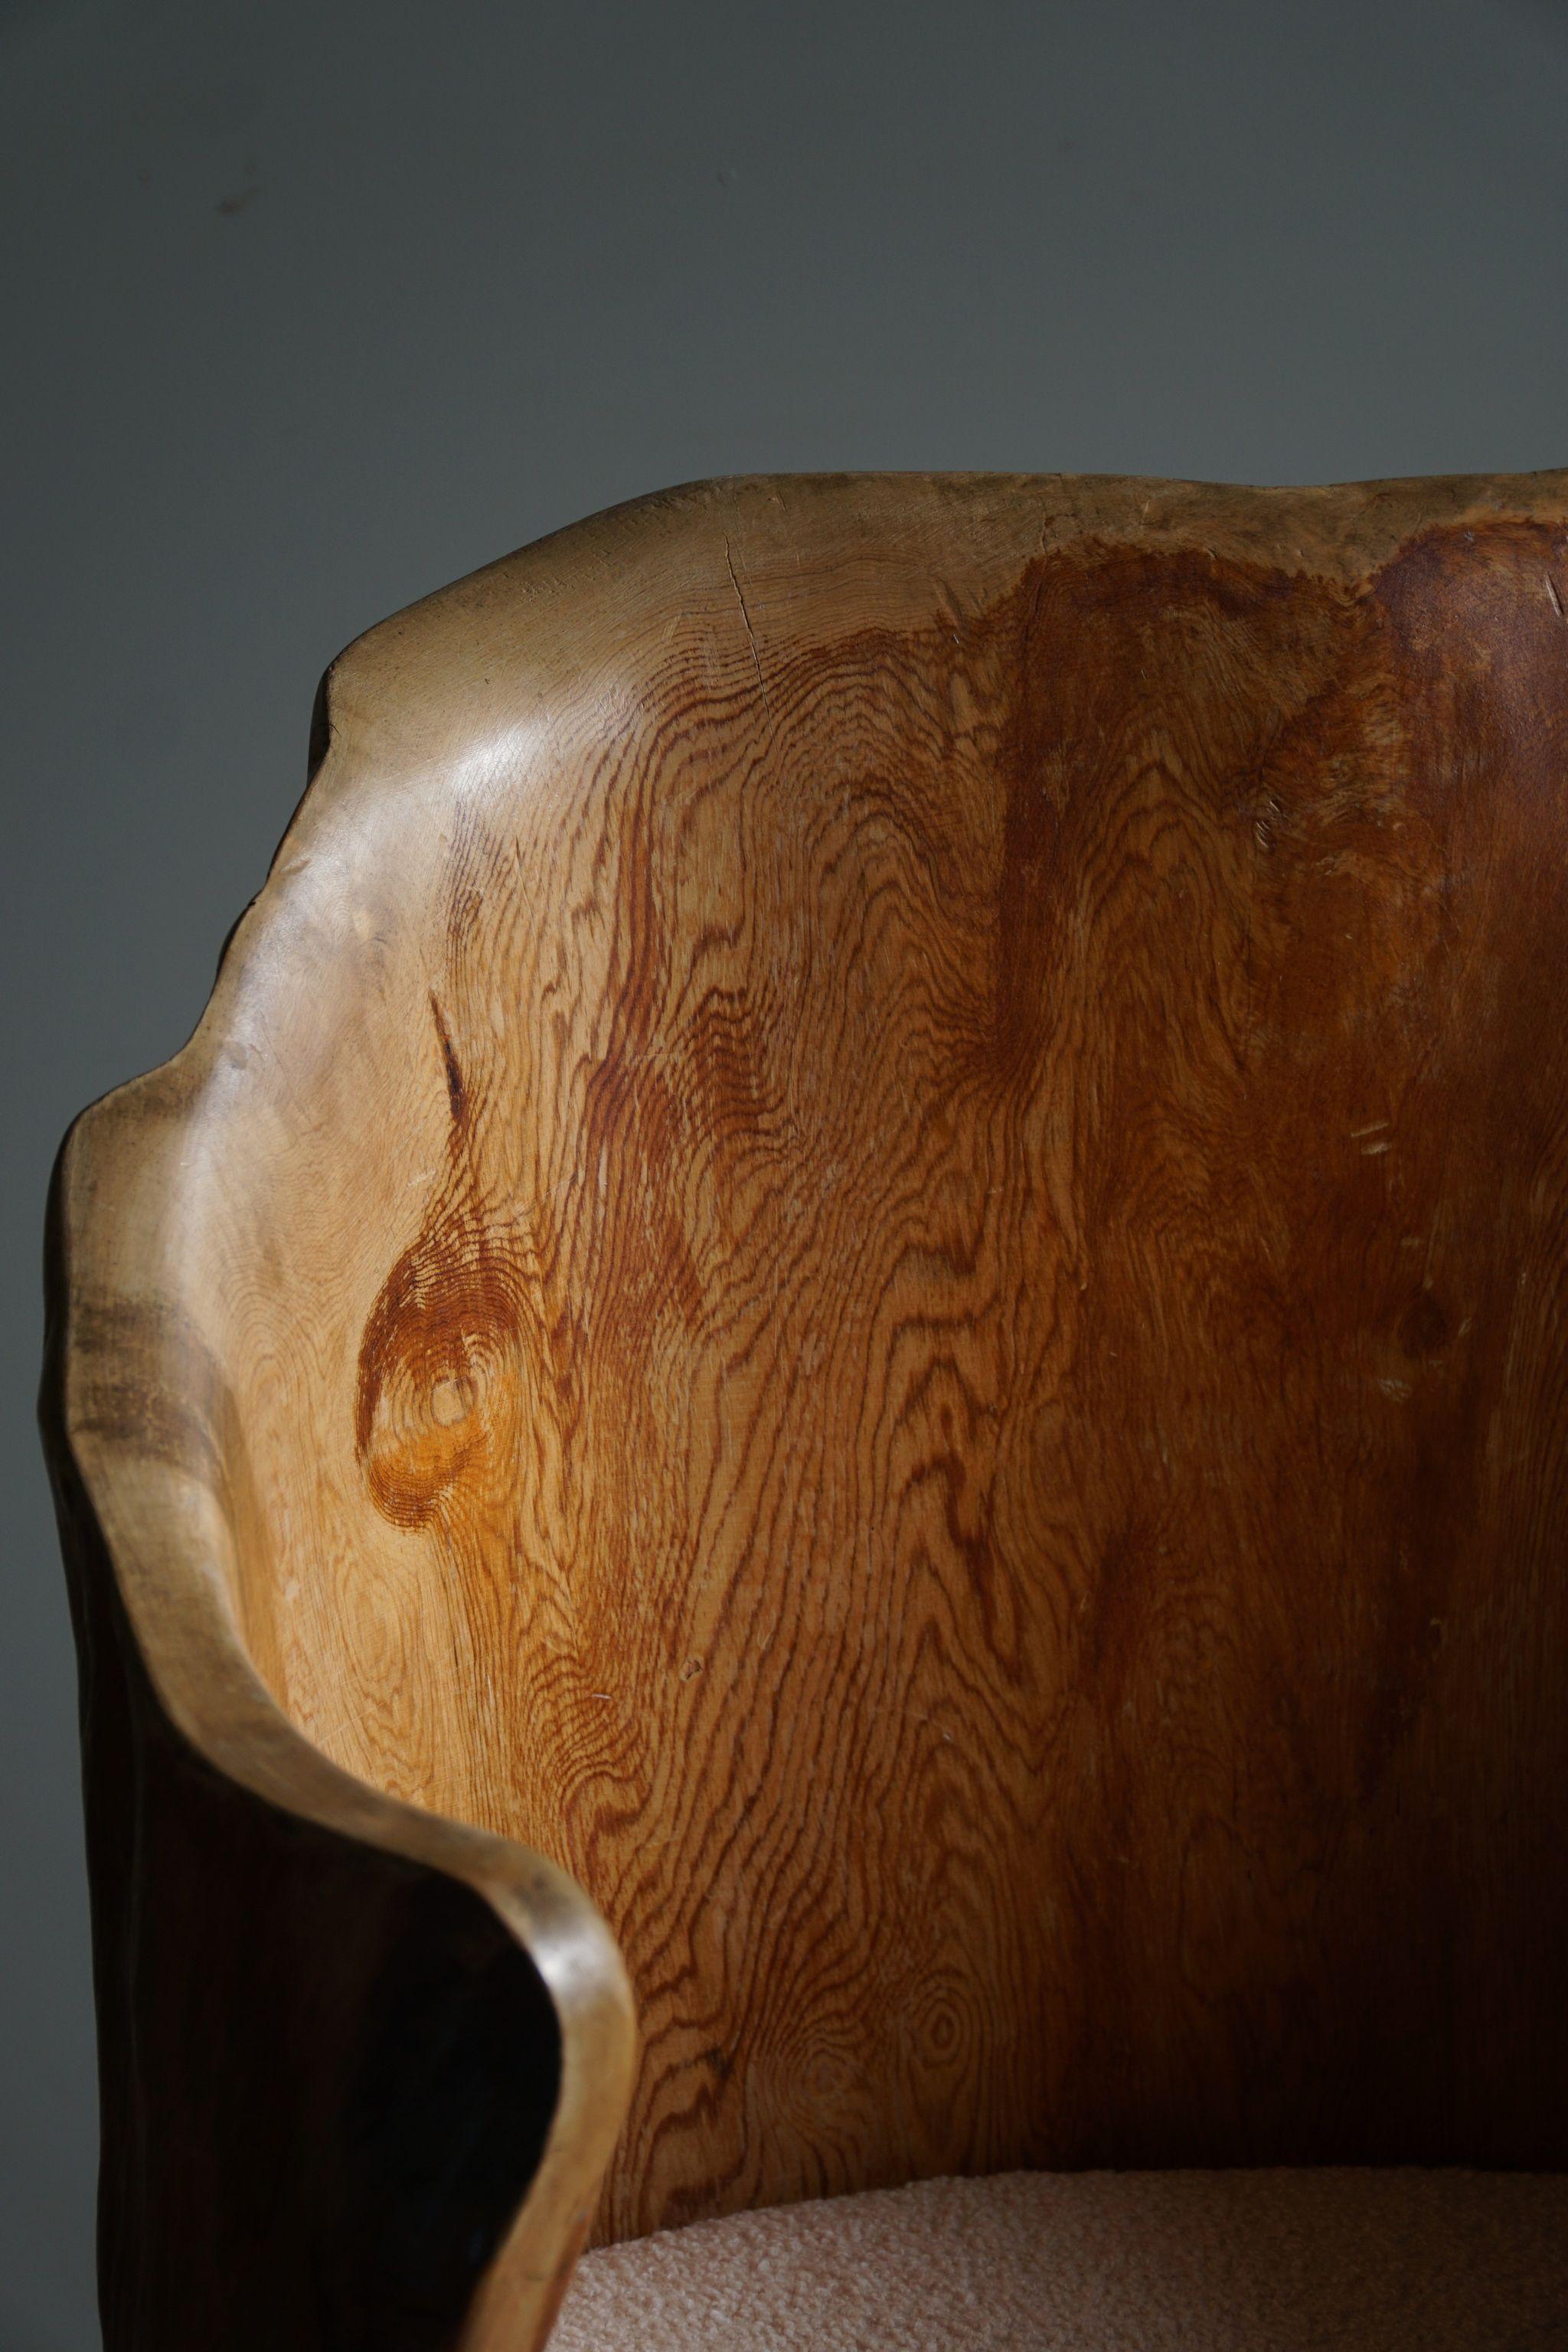 20th Century Hand-Carved Brutalist Stump Chair in Solid Pine, Wabi Sabi Style, Swedish, 1970s For Sale